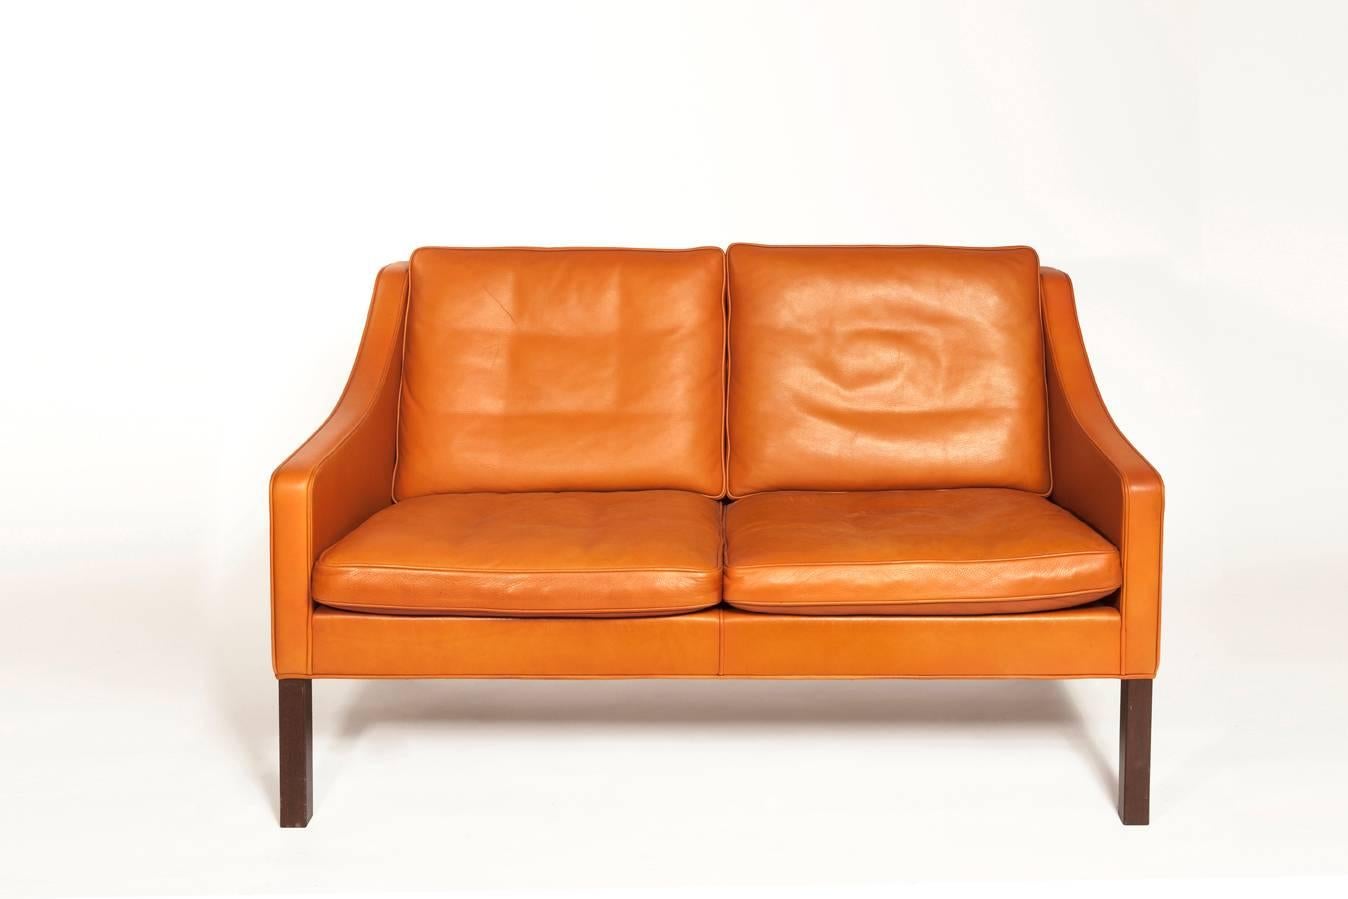 This beautiful orange leather sofa has an elegant simplicity to it. The high quality leather makes the sofa both comfortable and durable. A timeless piece of design and a great addition to the modern home.

Børge Mogensen (Aalborg, 13 April 1914–5